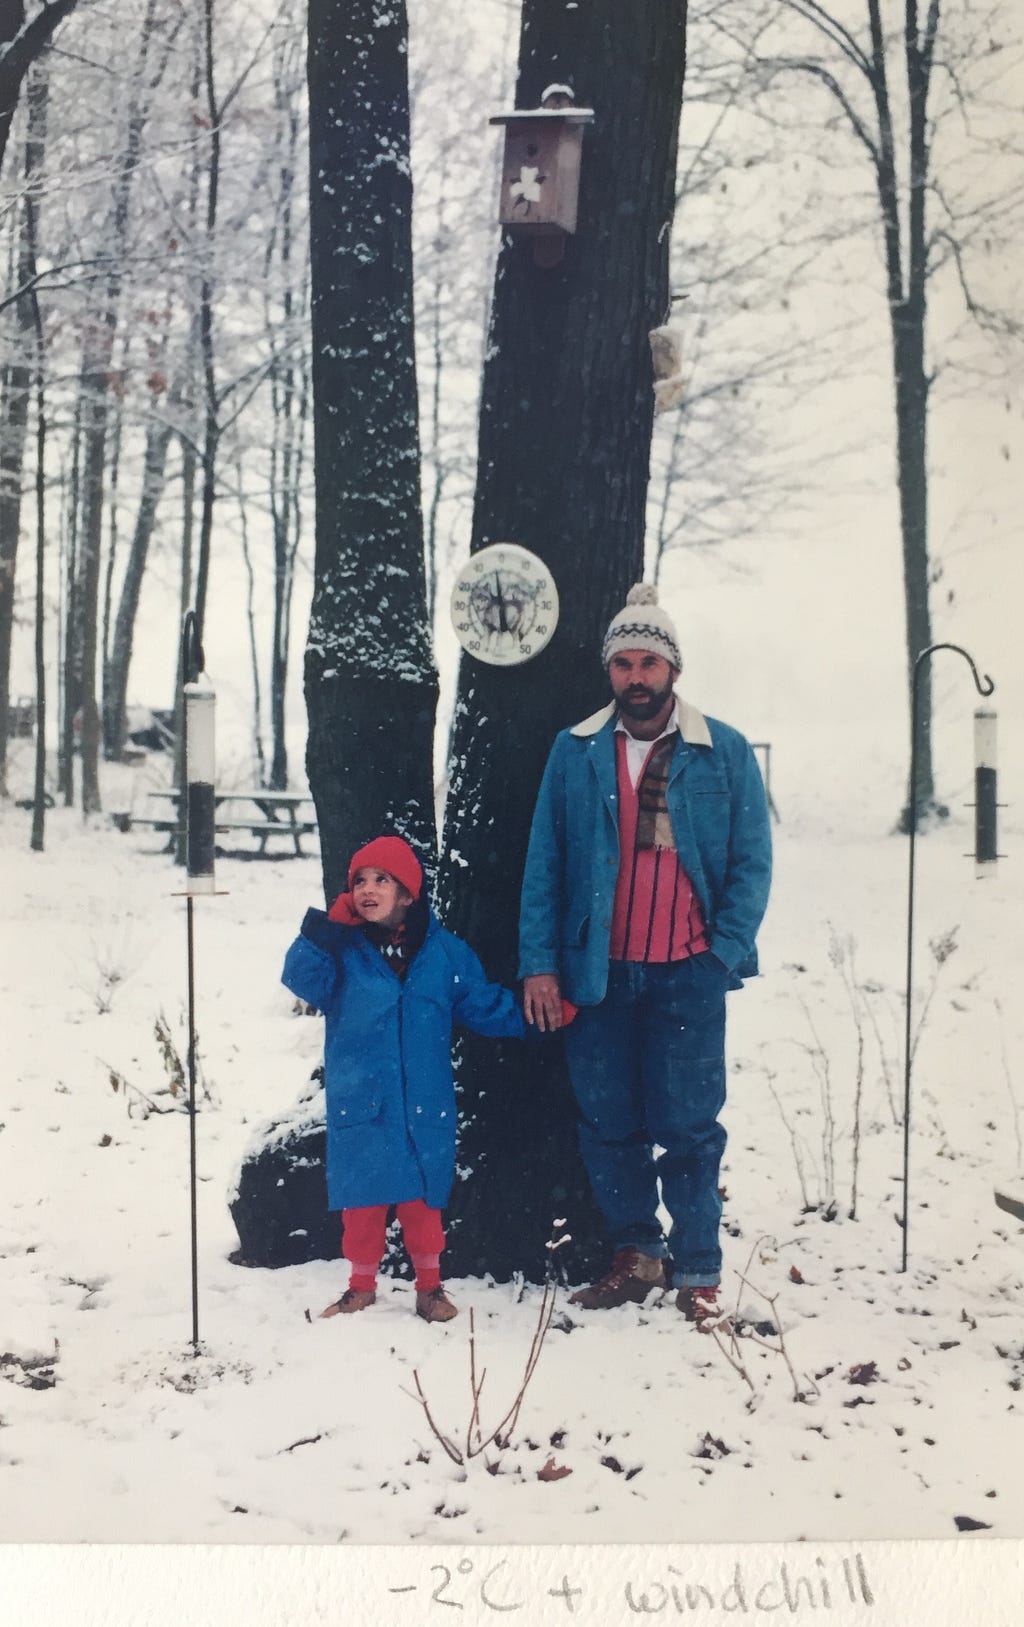 a small child in an over-sized winter coat holds hands with her father, both wearing knitted hats. There is snow on the ground and trees behind them. A hand-written note at the bottom of the photo reads “-2 Celcius + windchill”